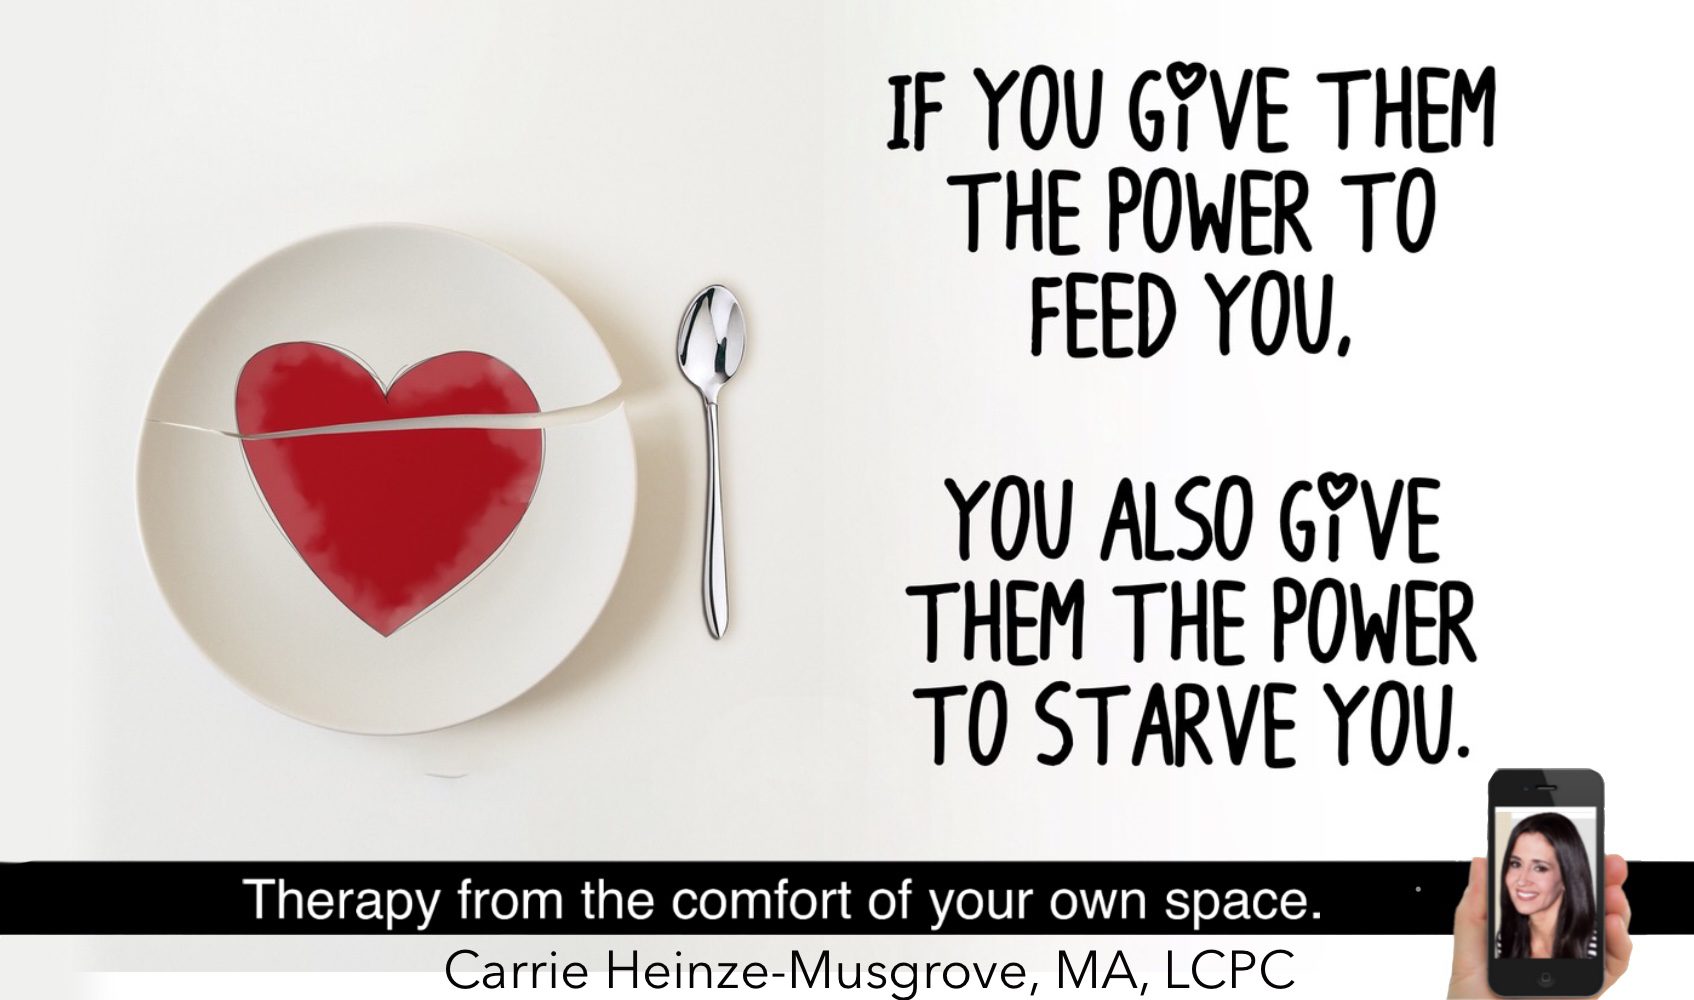 If you give them the power to feed you, you also give them the power to starve you.